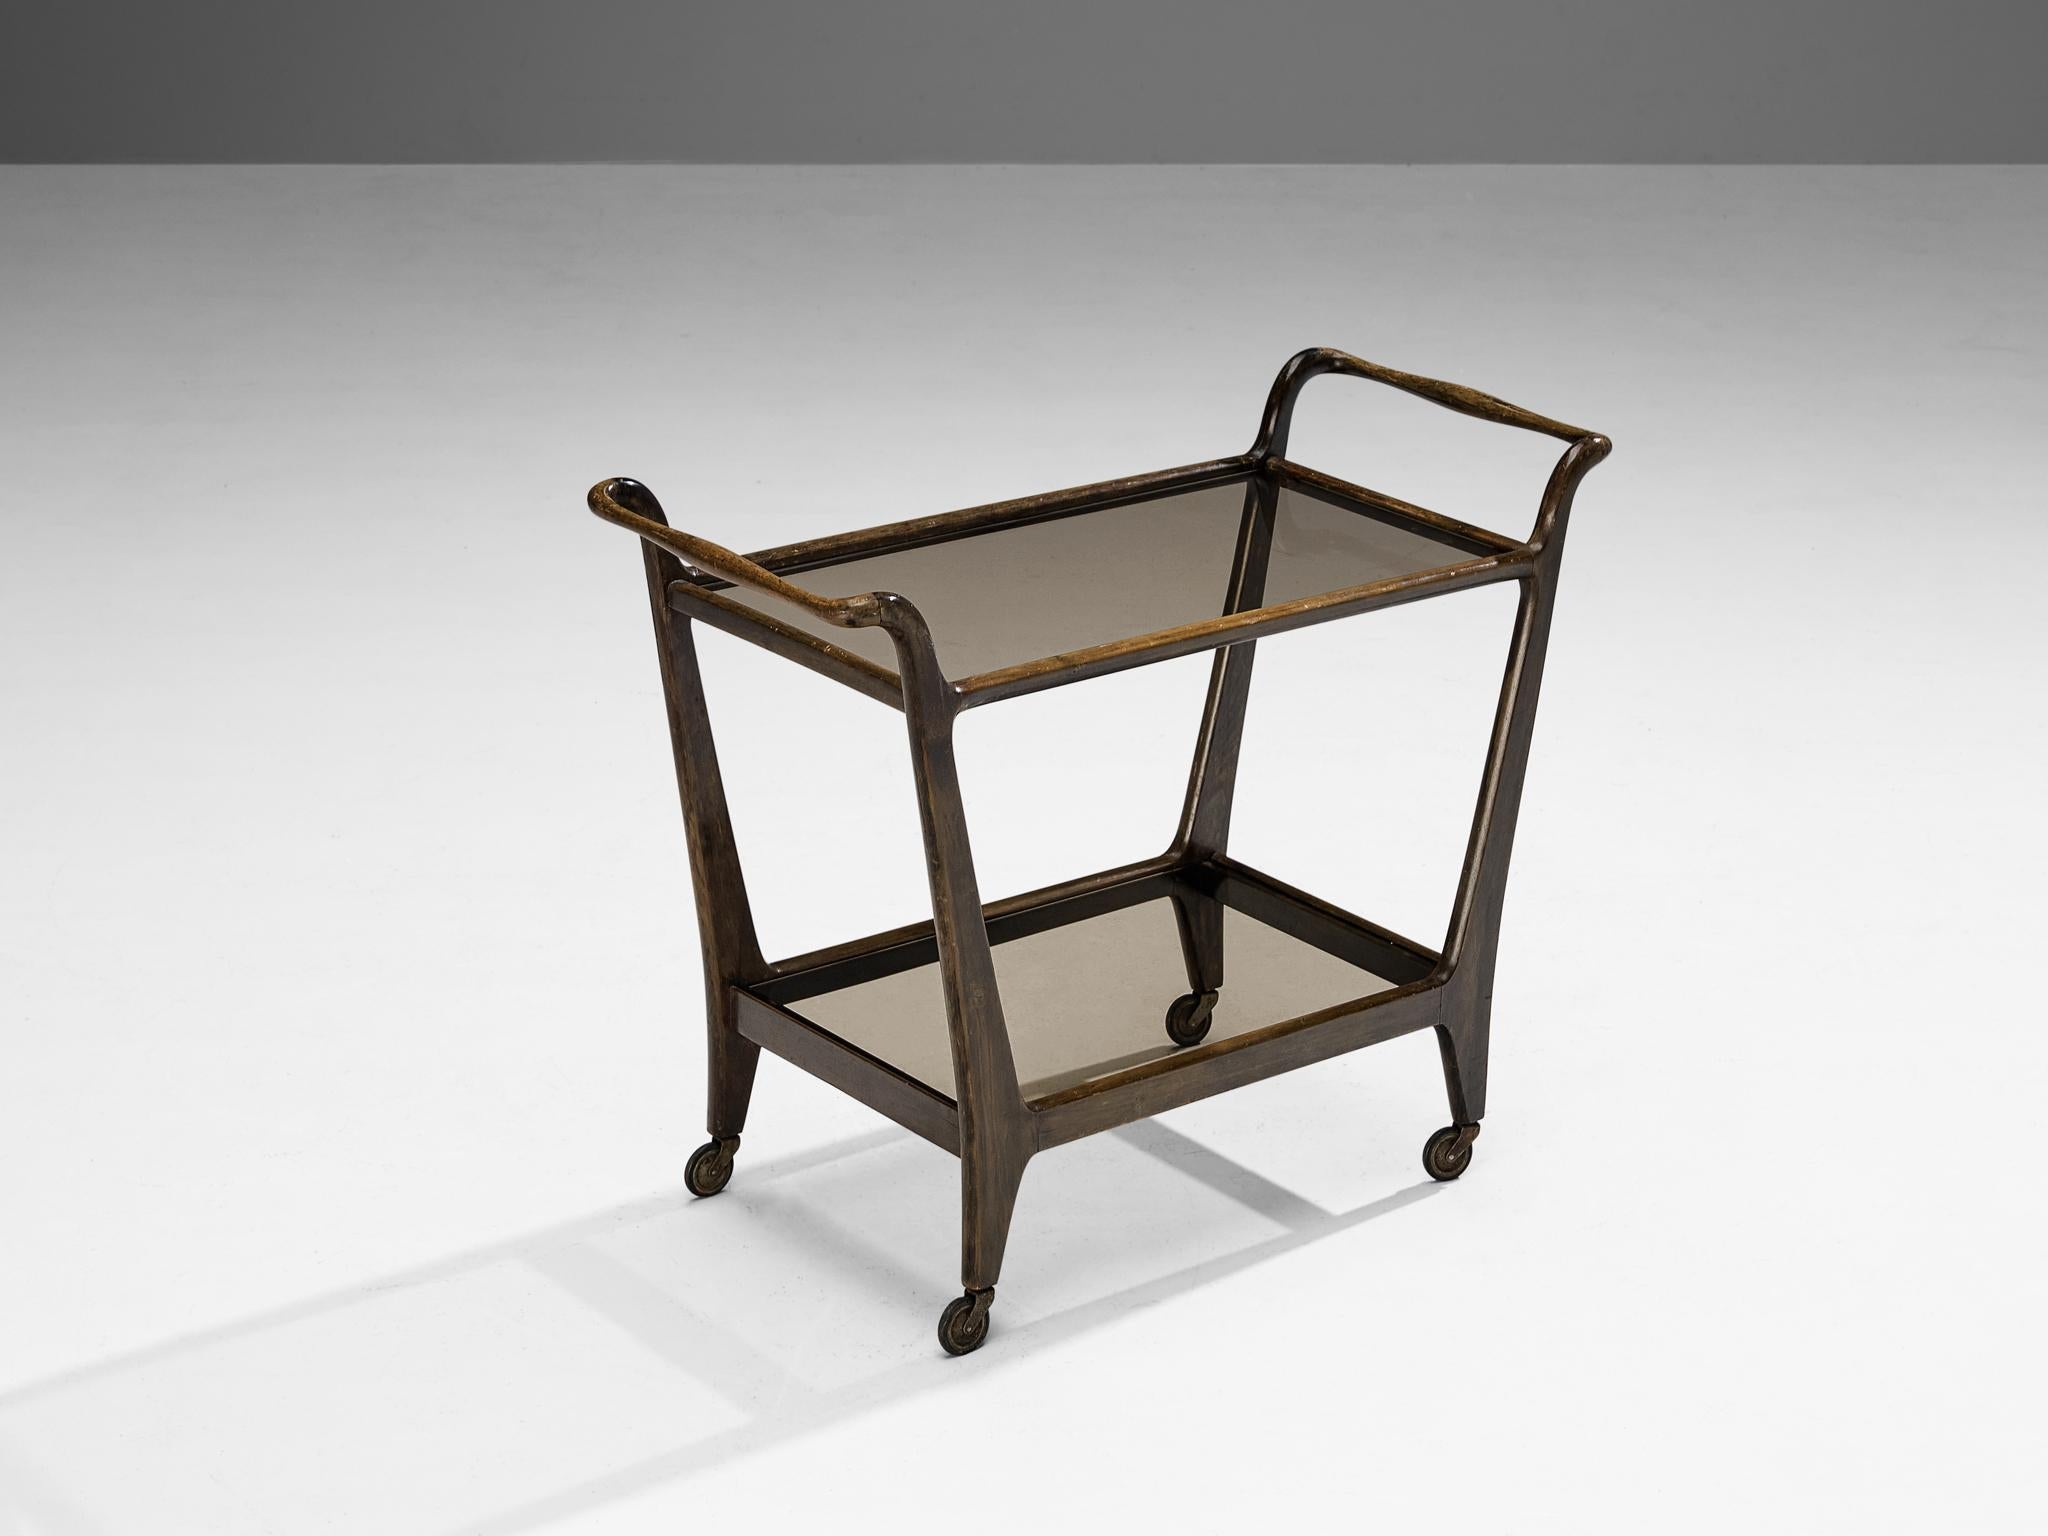 Bar Cart or Tea Trolley in Wood and Glass